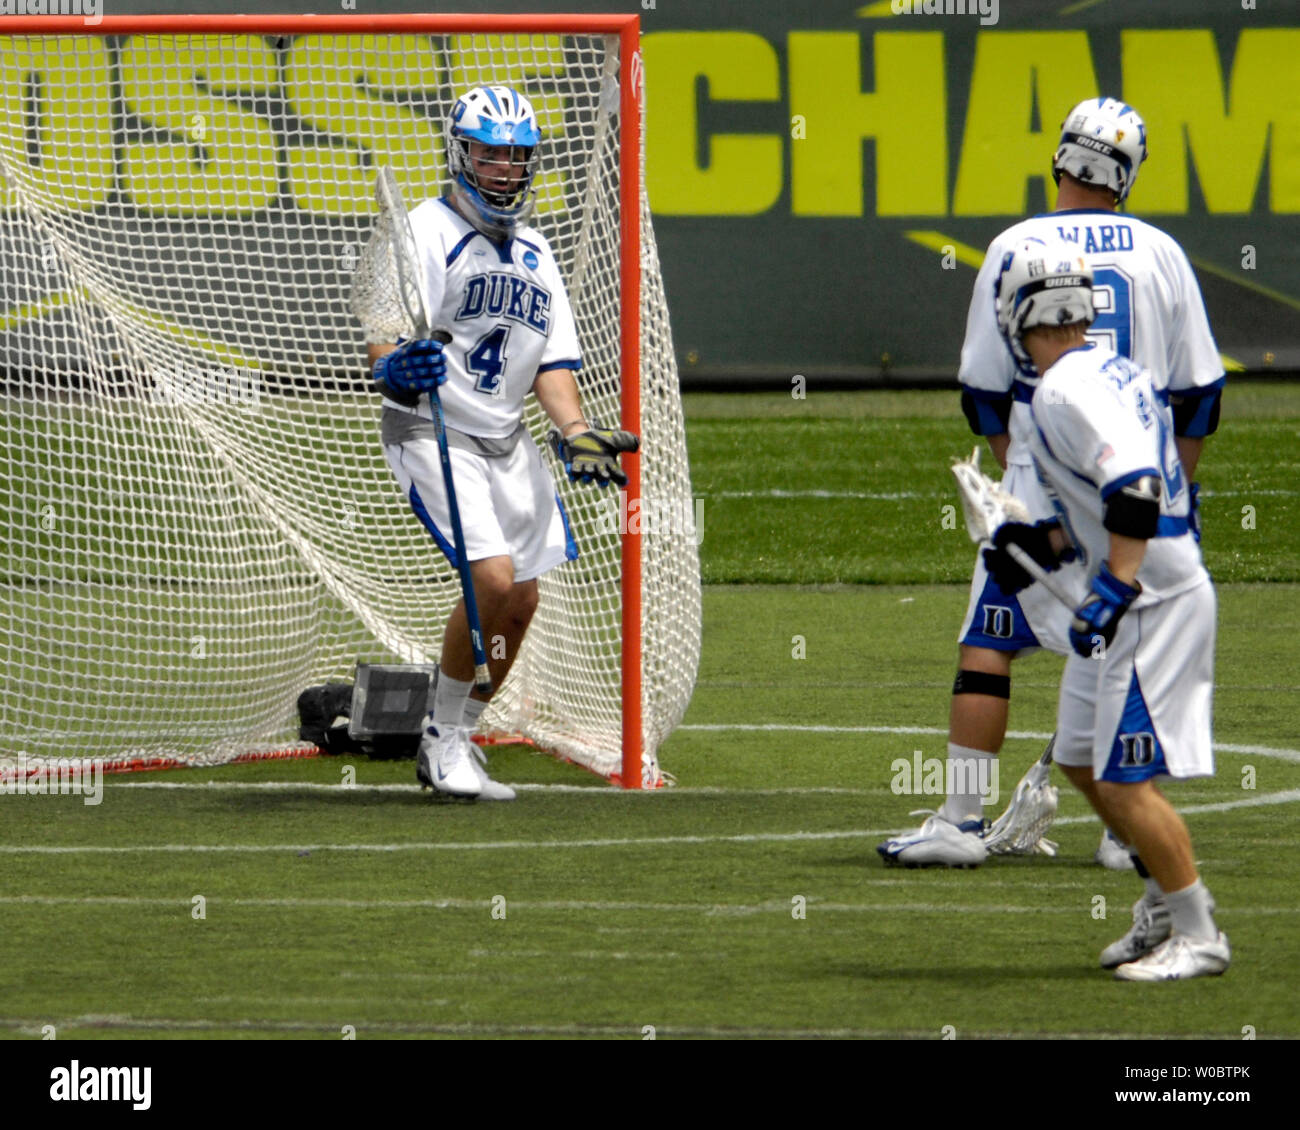 Duke University goalie Dan Loftus (4) talks with mid fielder Steve Schoeffel (20) and mid fielder Michael Ward (9) after giving up a goal in the second quarter against the Johns Hopkins University Blue Jays in the NCAA Division I Lacrosse Championship at M&T Bank Stadium in Baltimore, Maryland on May 28, 2007.  Johns Hopkins defeated Duke to win the NCAA lacrosse championship 12-11.  (UPI Photo/ Mark Goldman) Stock Photo